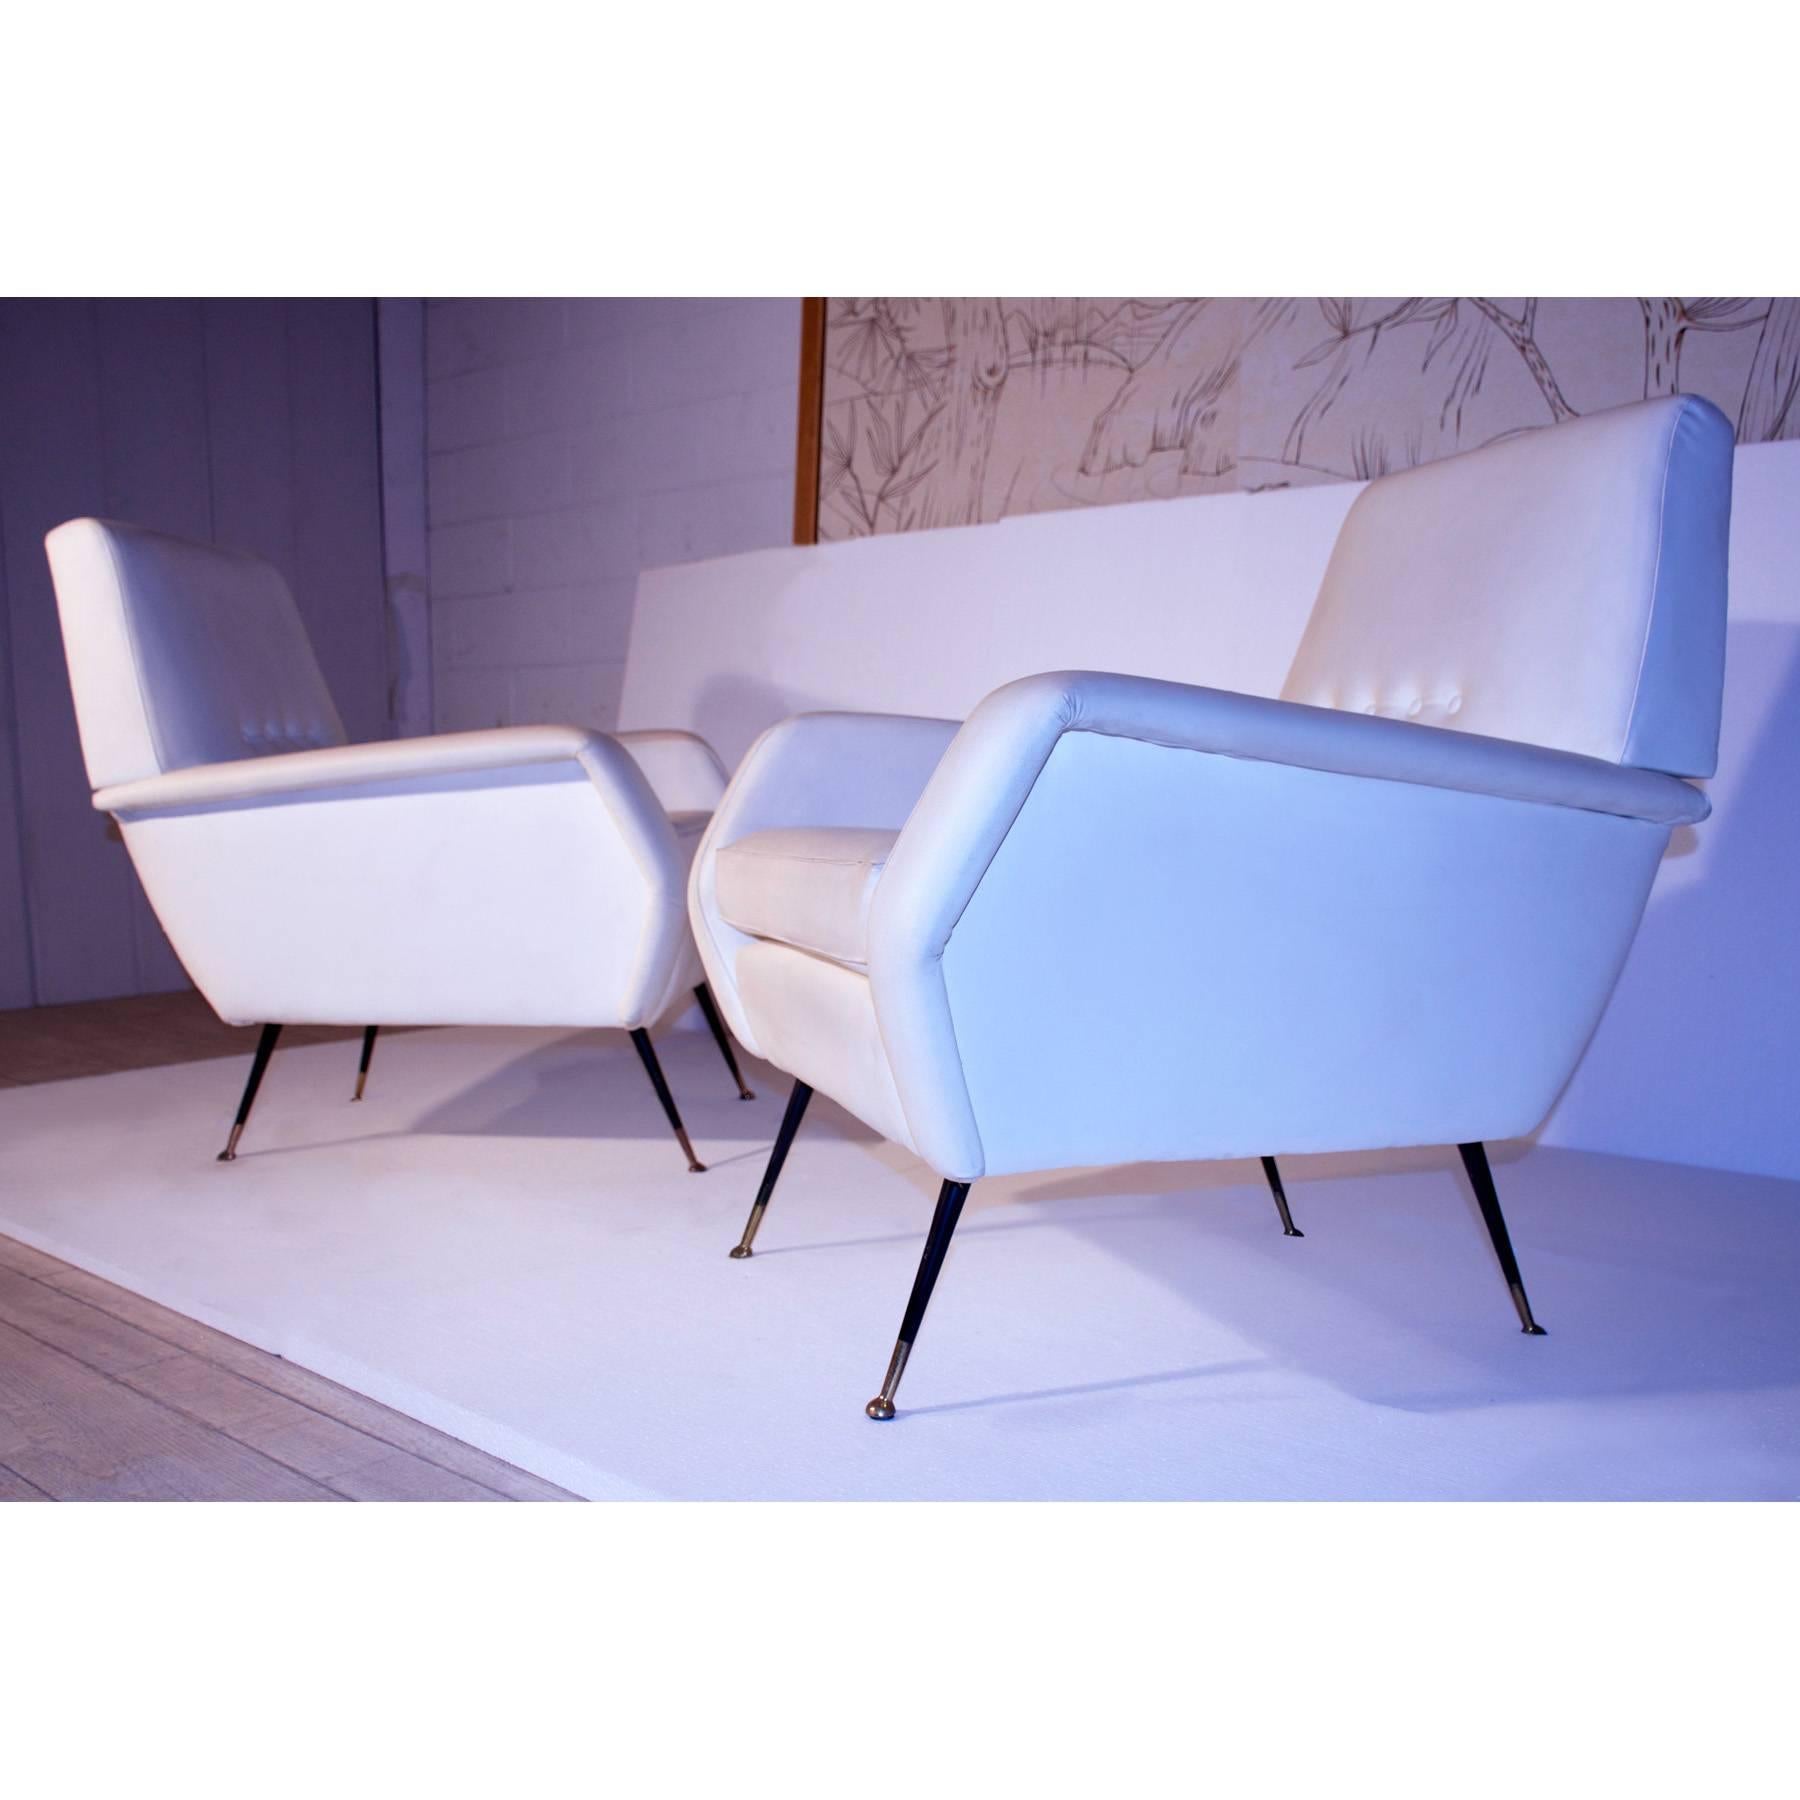 Very stylish and extremely comfortable pair of Italian wingback armchairs or club chairs sitting on polished brass legs, designed in the style of Gio Ponti and original of the 1950s.
Their seats are upholstered in white leatherette in excellent